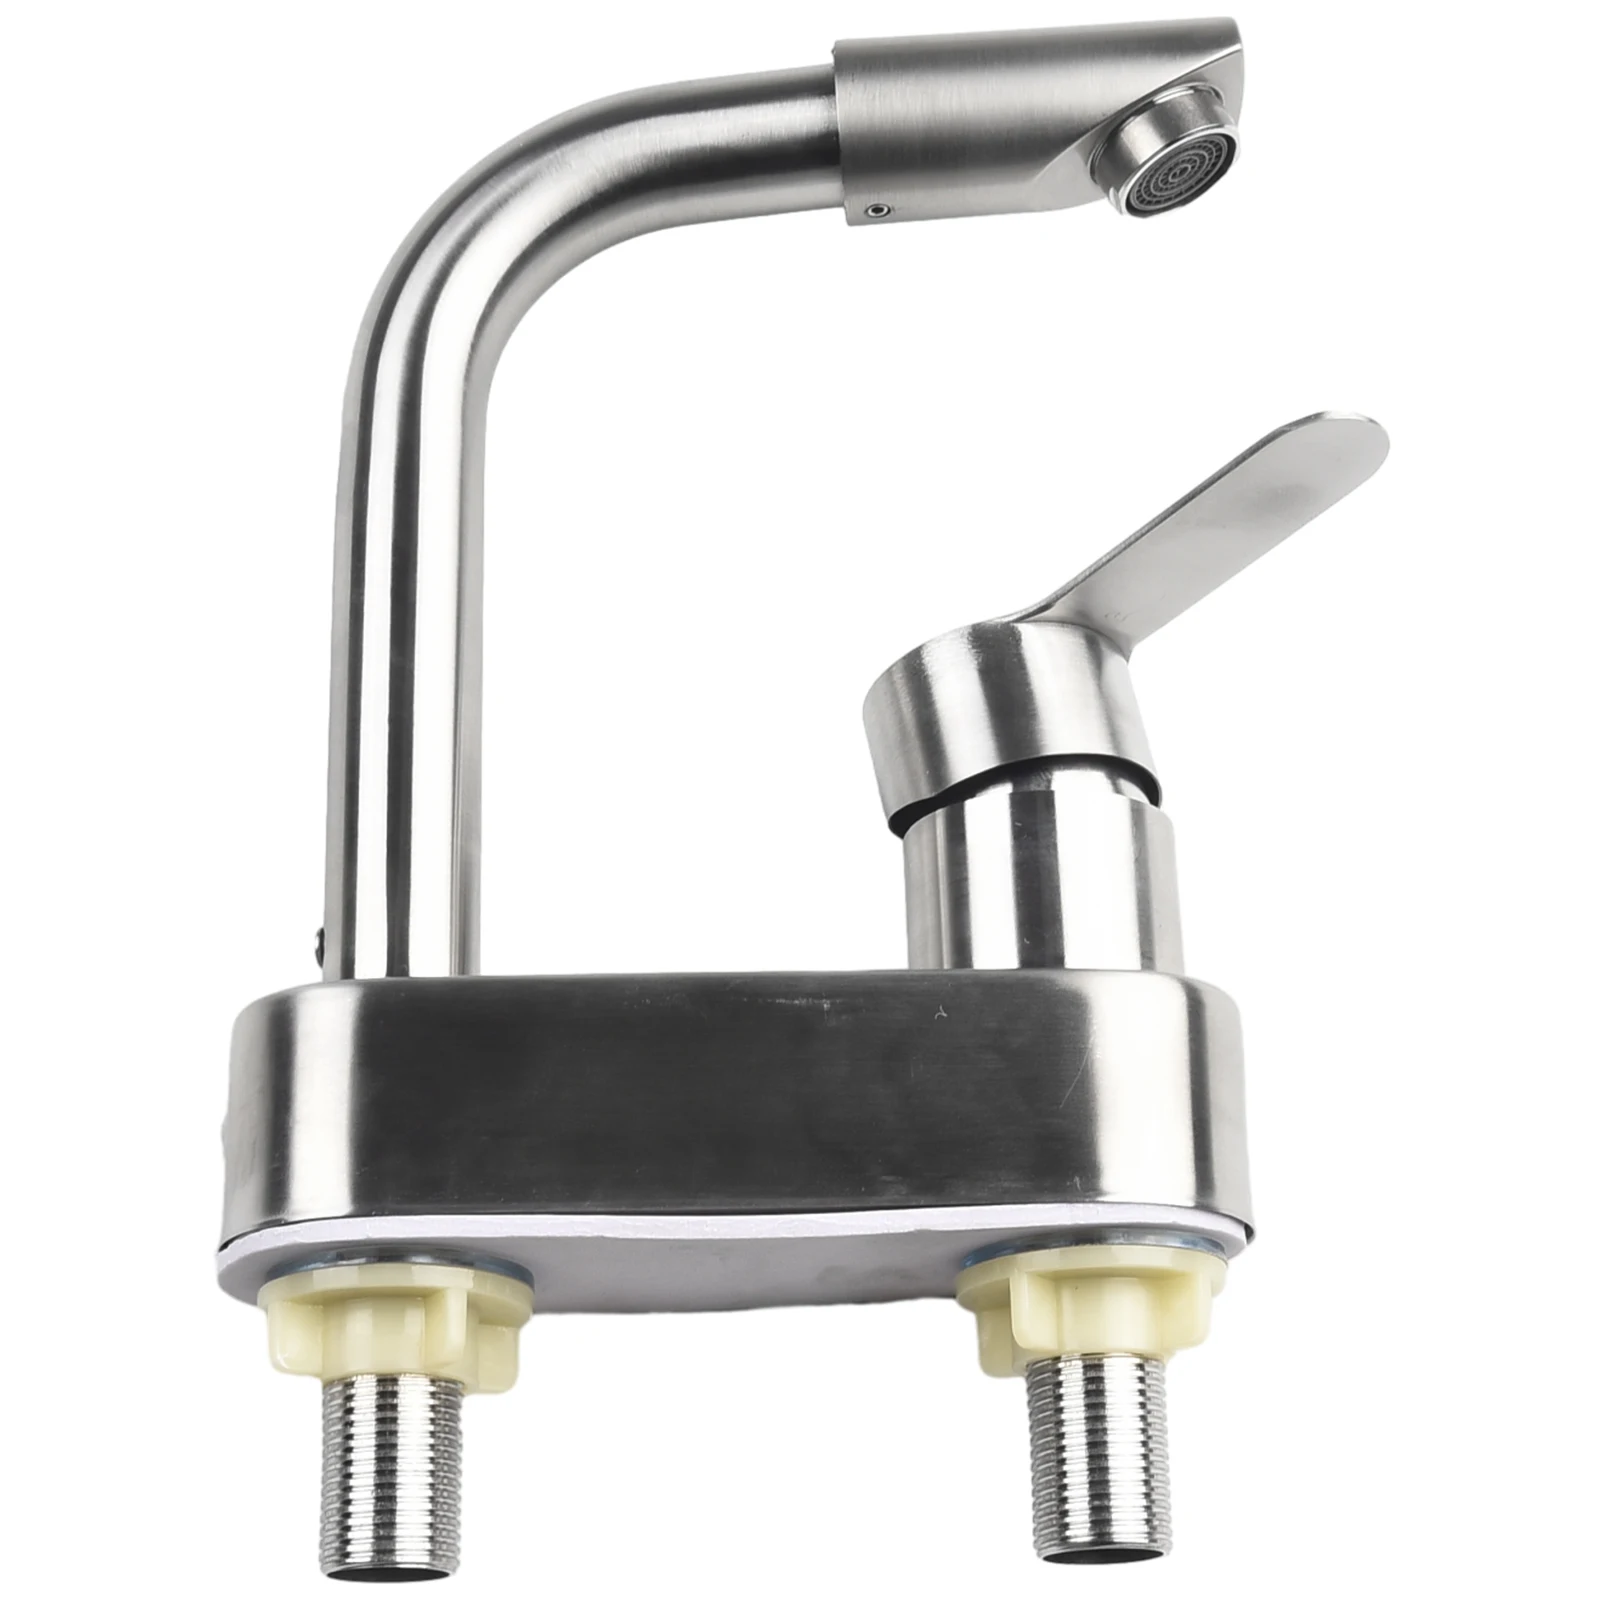 

Bathroom Basin Faucet Stainless Steel Hot Cold Wash Mixer Crane Tap Rotation Sink Faucets Double Hole Bathroom Tap